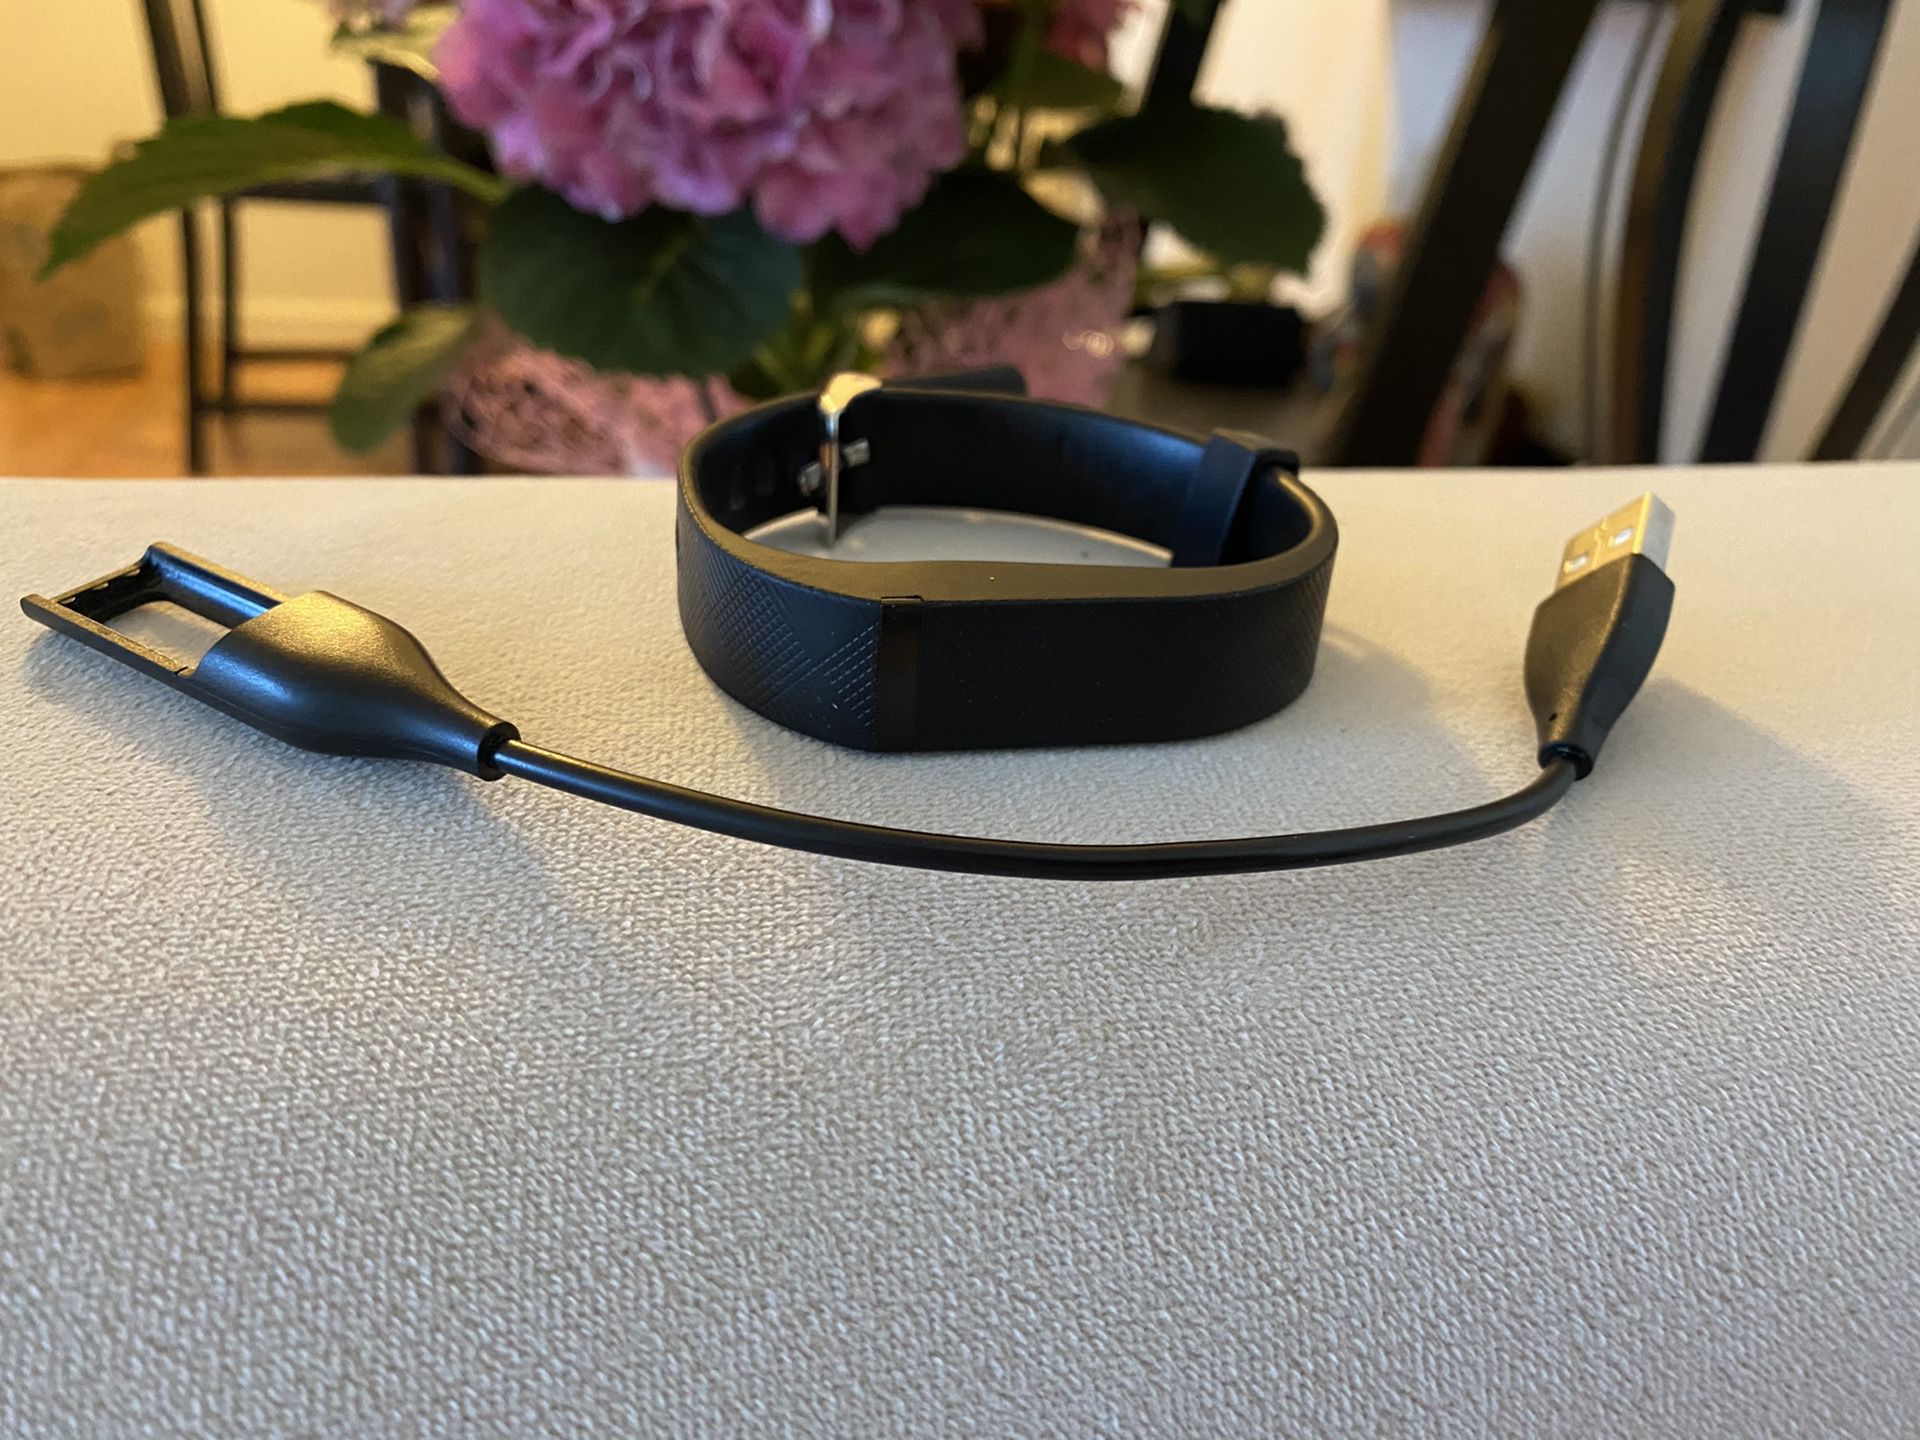 Basic black Fitbit with charger